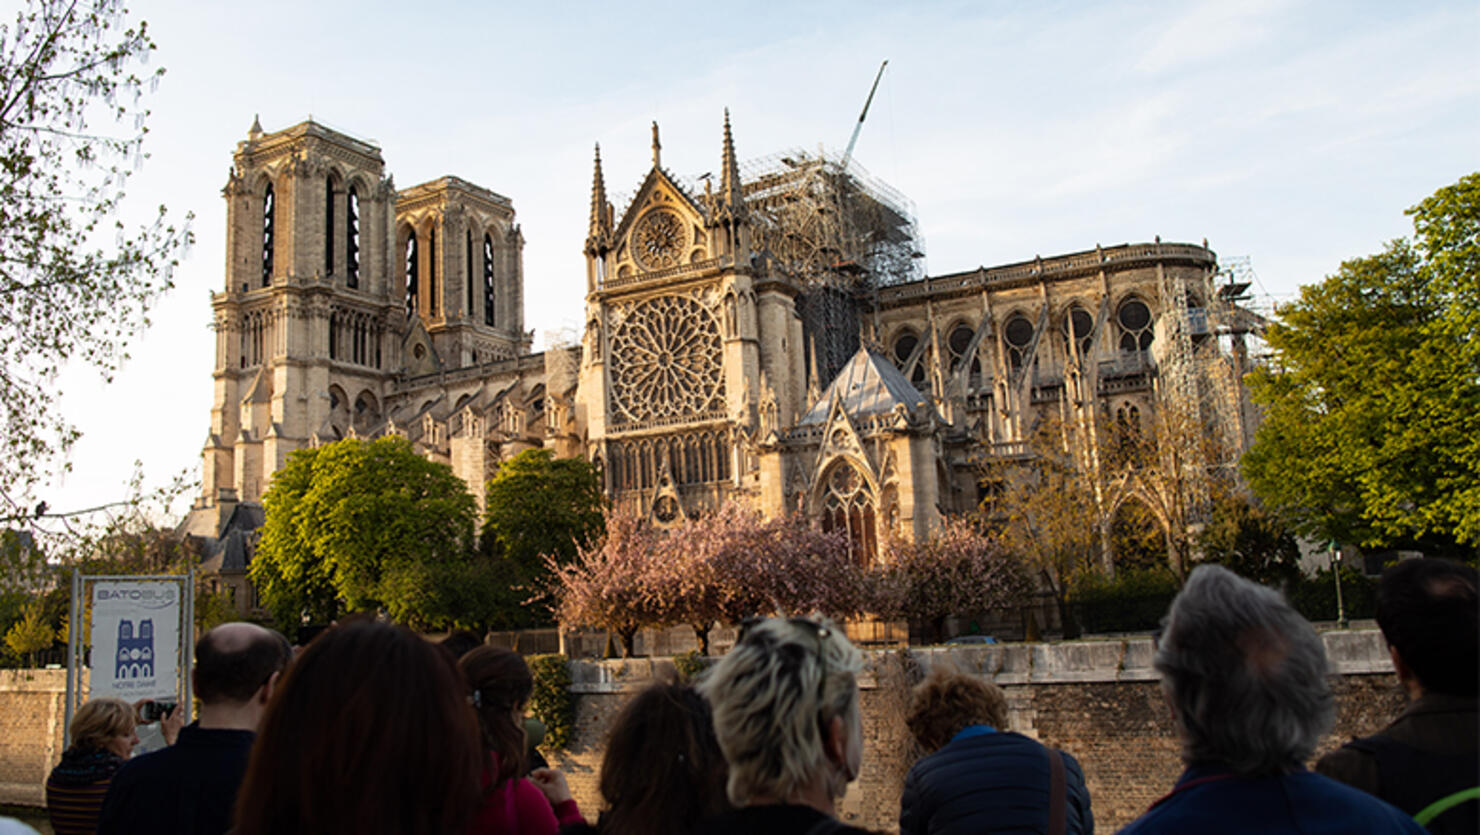 After the devastating fire at Notre-Dame Cathedral